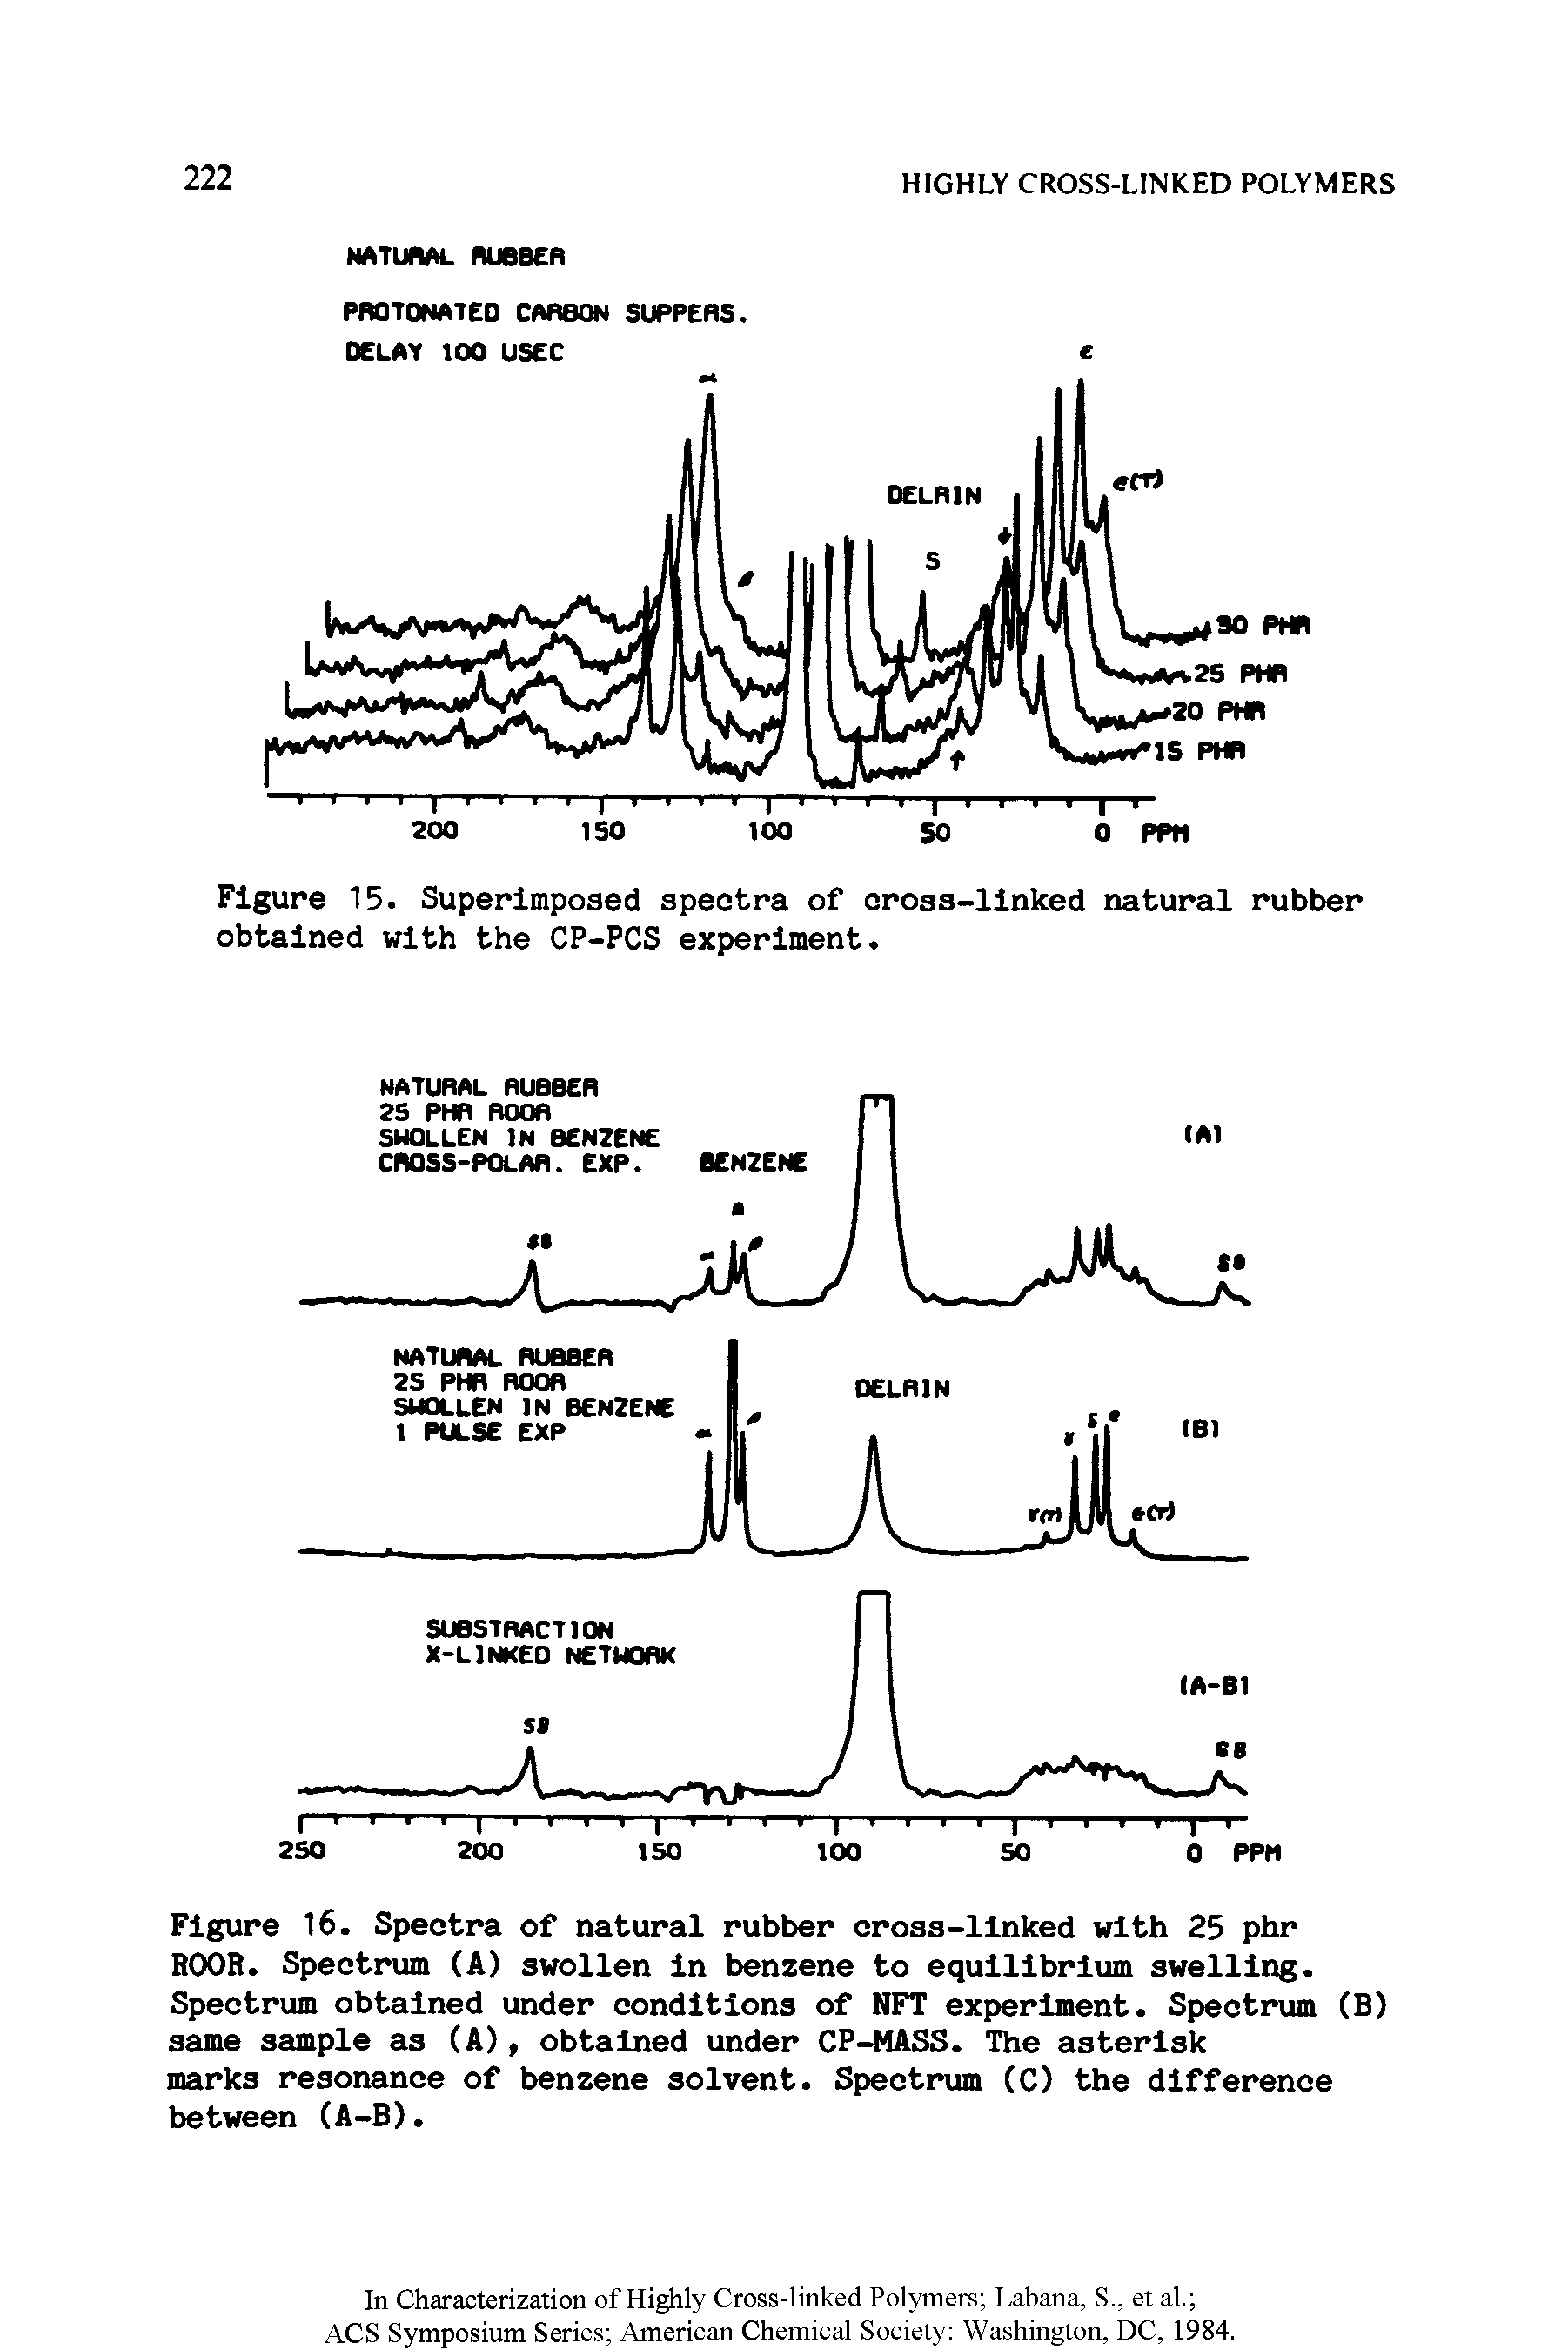 Figure 16. Spectra of natural rubber cross-linked with 25 phr ROOR. Spectrum (A) swollen in benzene to equilibrium swelling. Spectrum obtained under conditions of NFT experiment. Spectrum (B) same sample as (A), obtained under CP-MASS. The asterisk marks resonance of benzene solvent. Spectrum (C) the difference between (A-B).